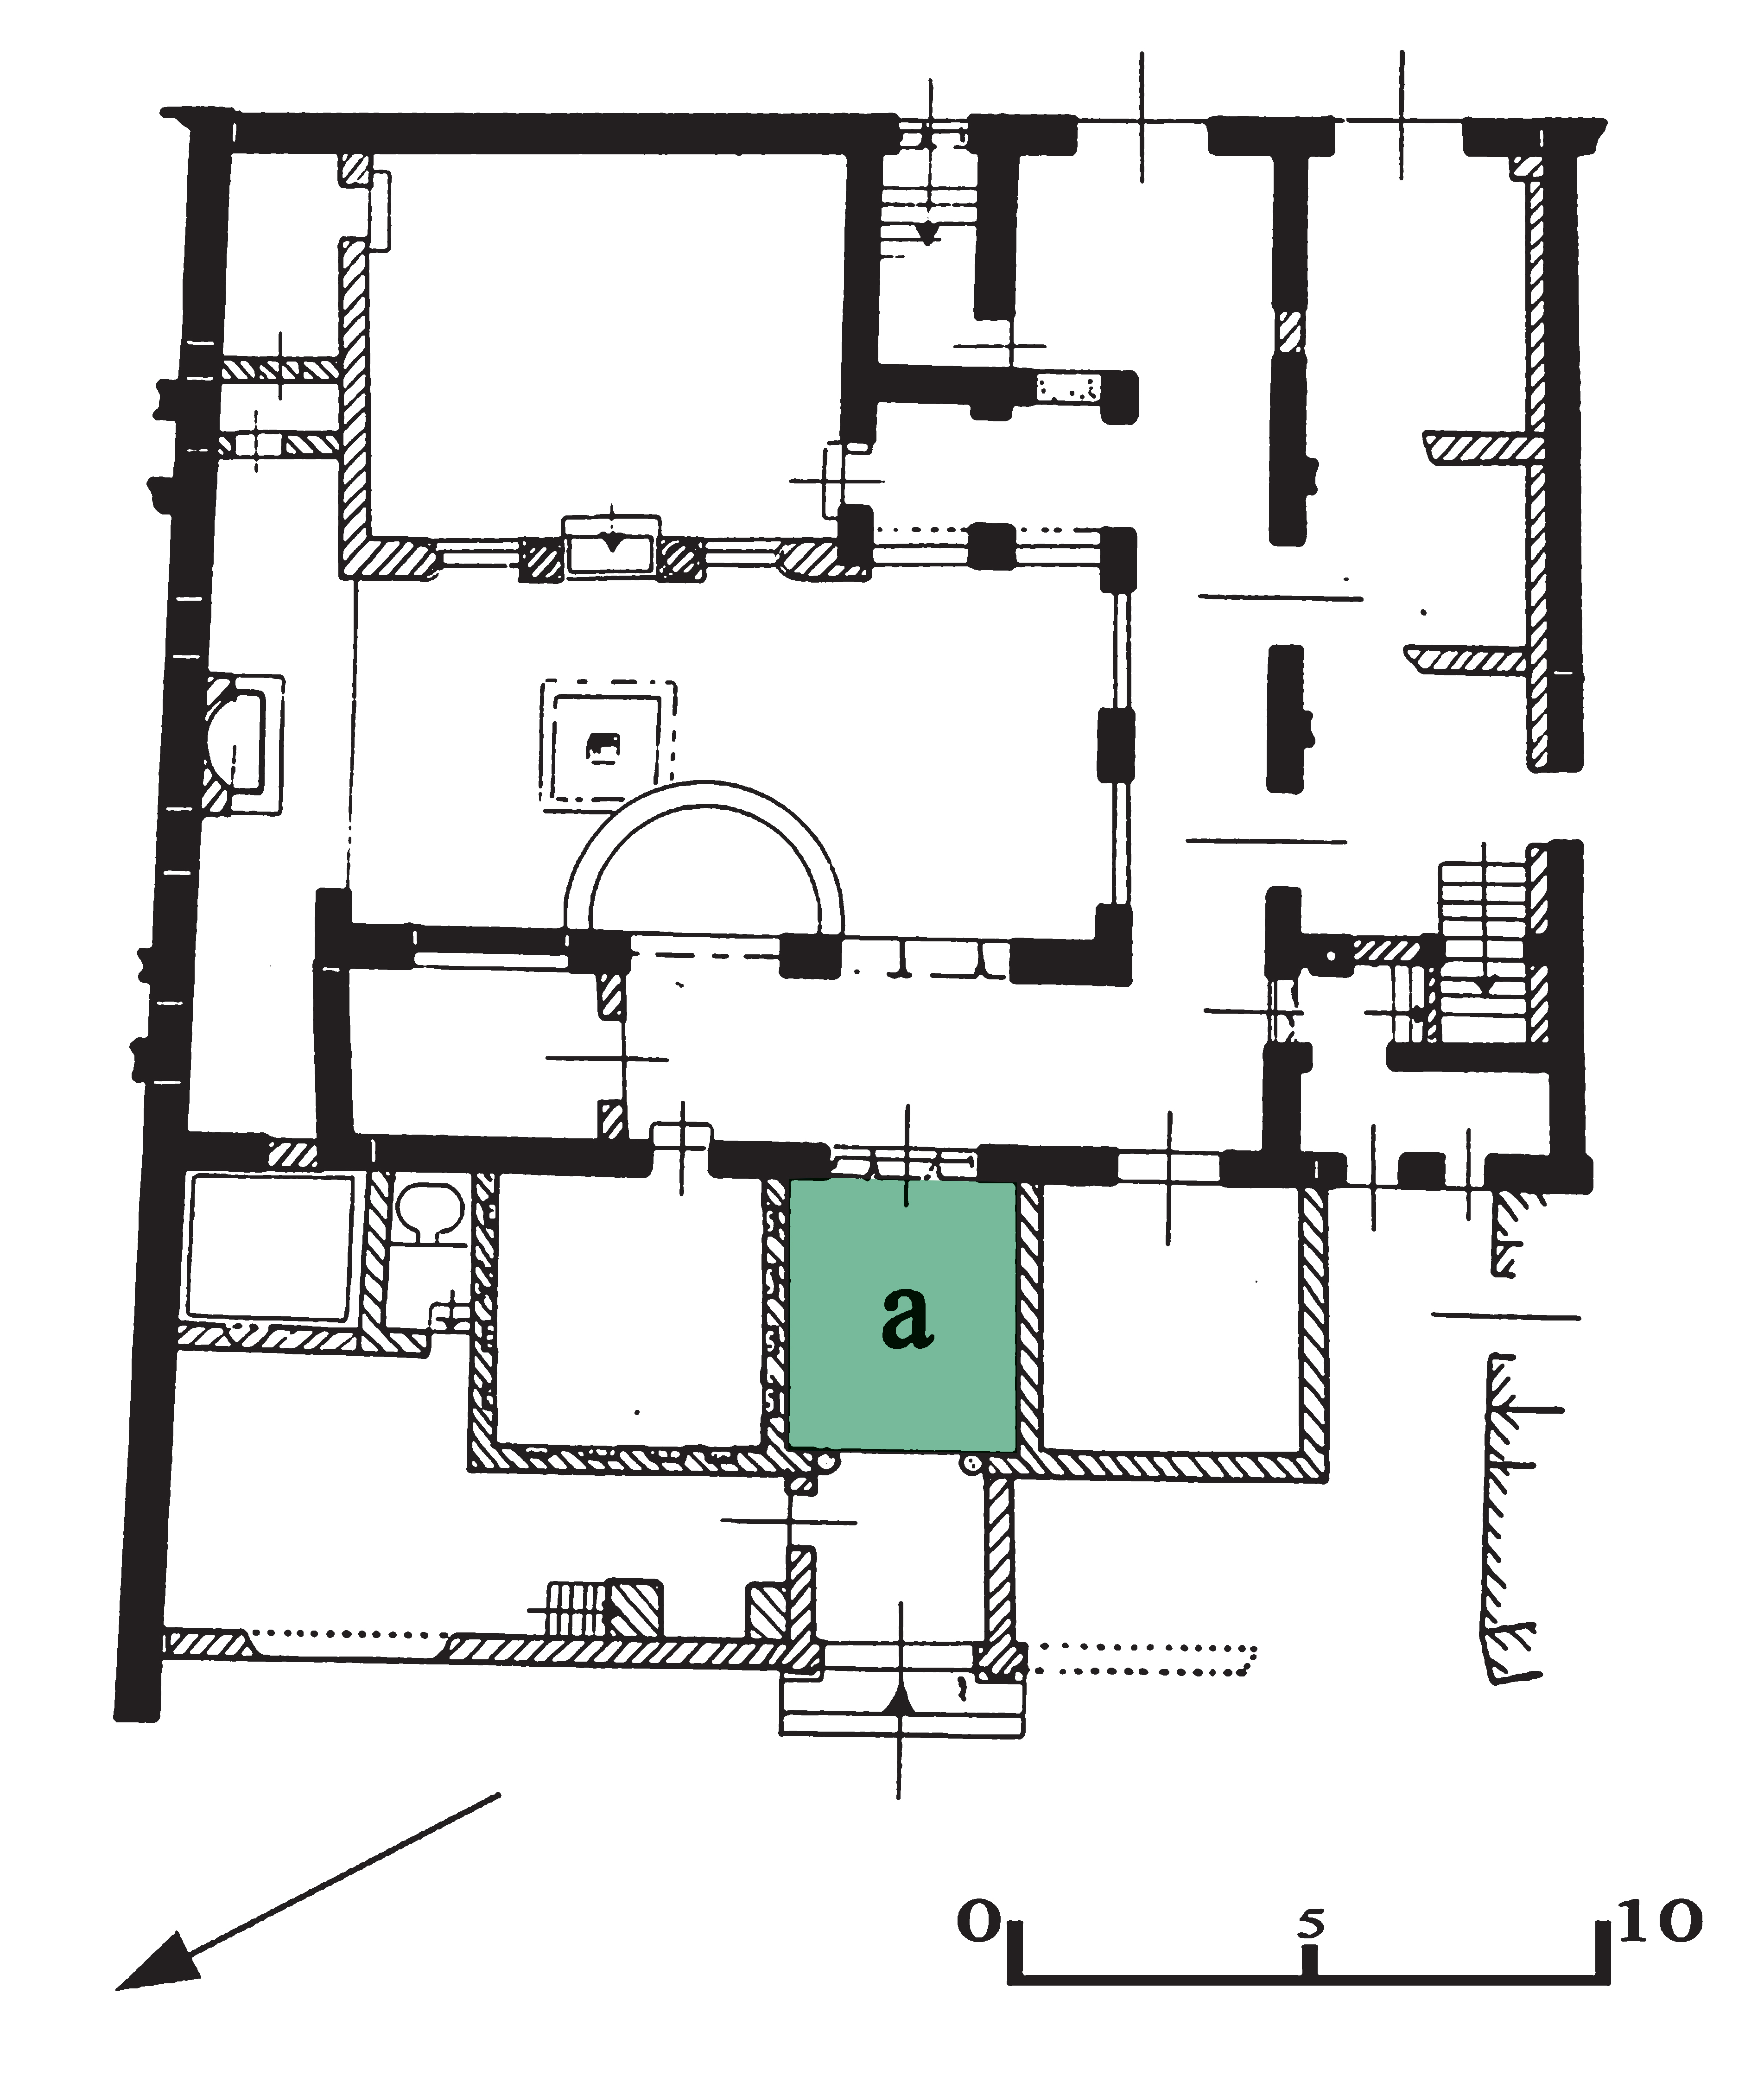 Plan of the Garden beneath the House of the Fishes